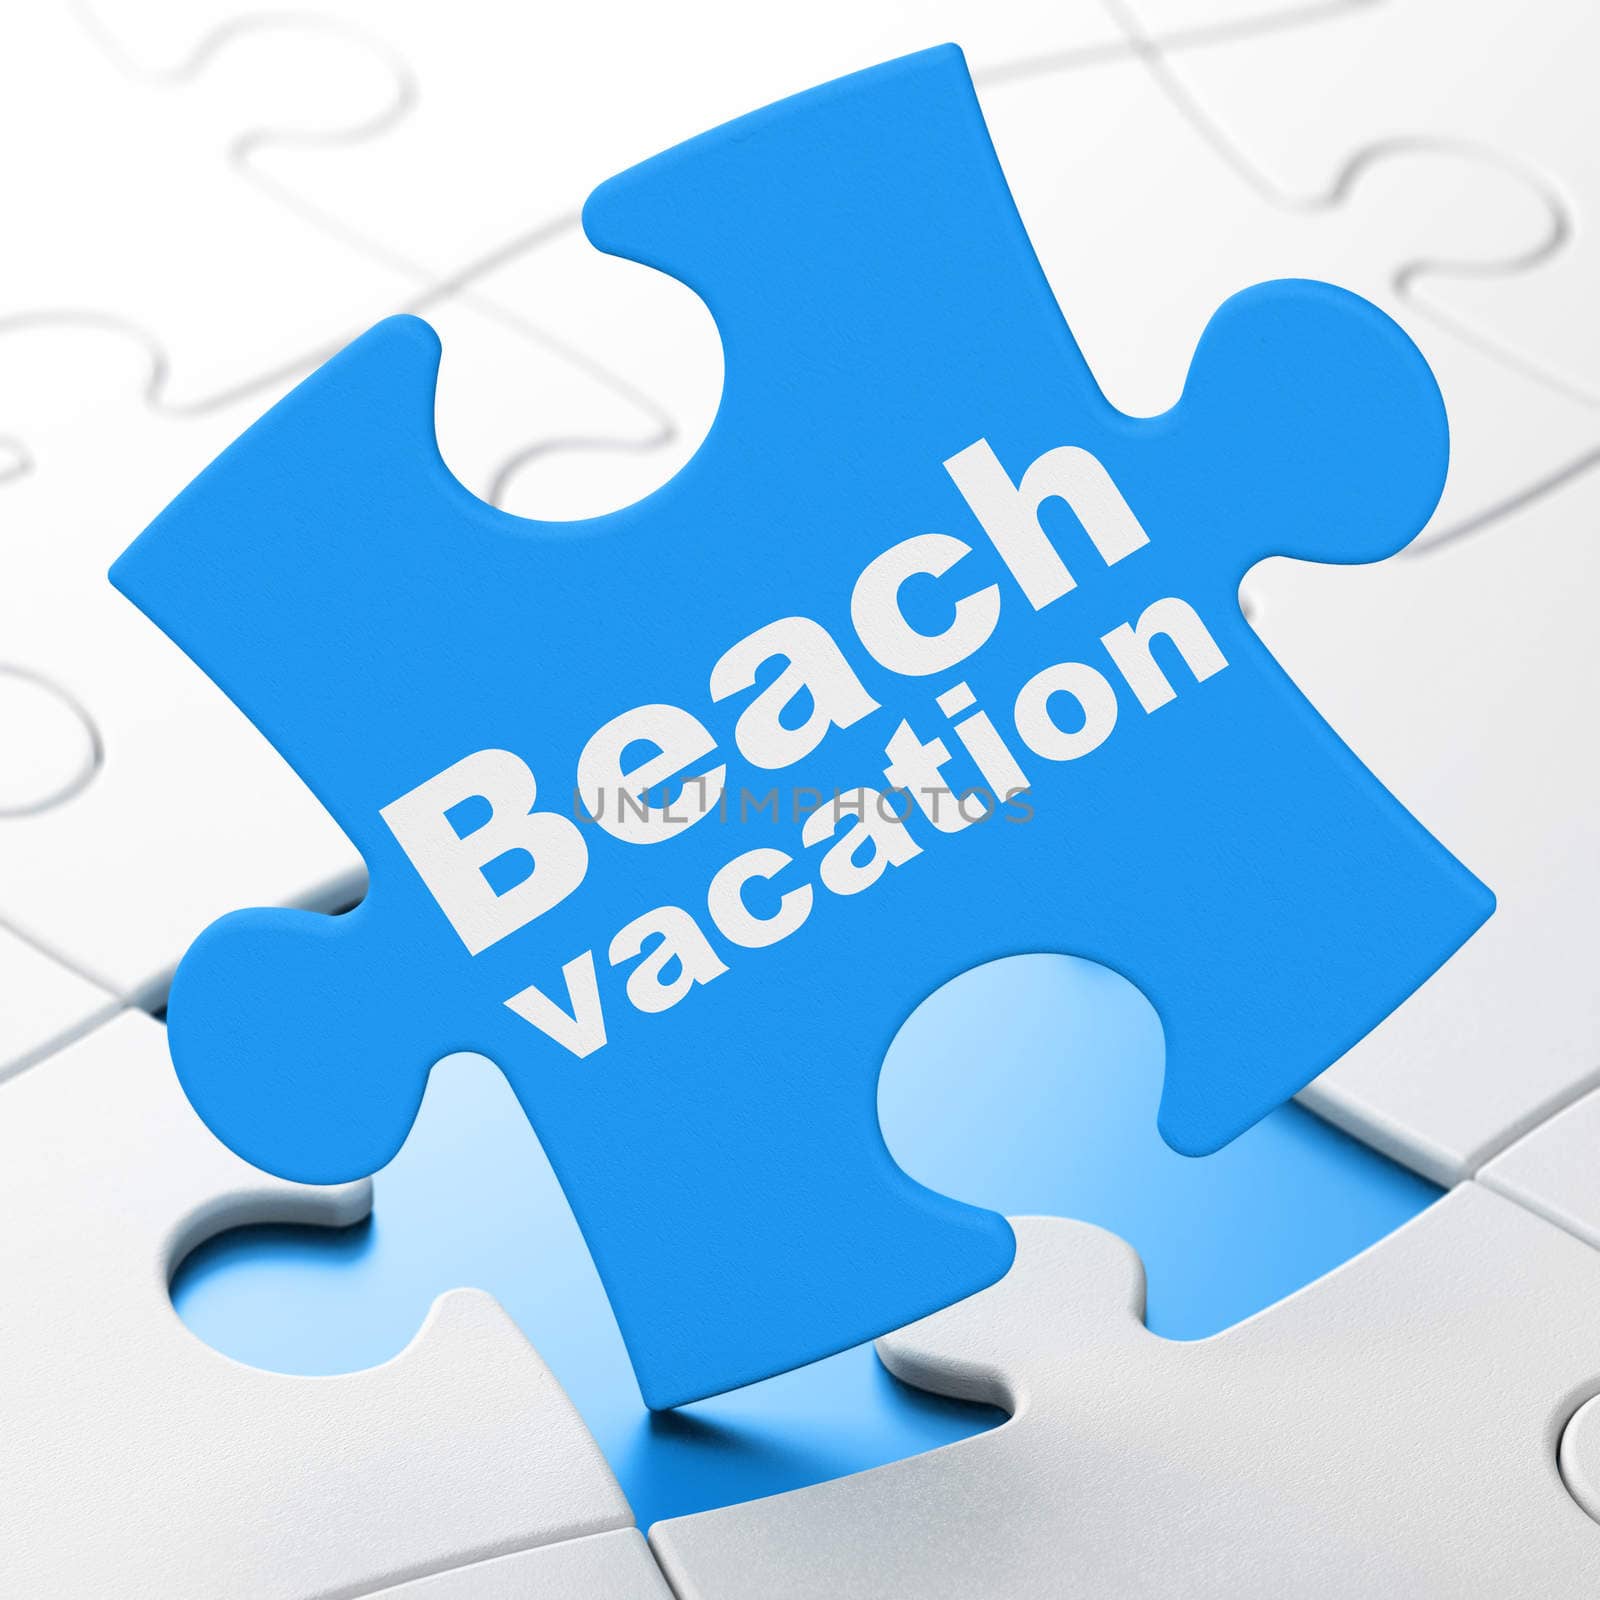 Vacation concept: Beach Vacation on puzzle background by maxkabakov